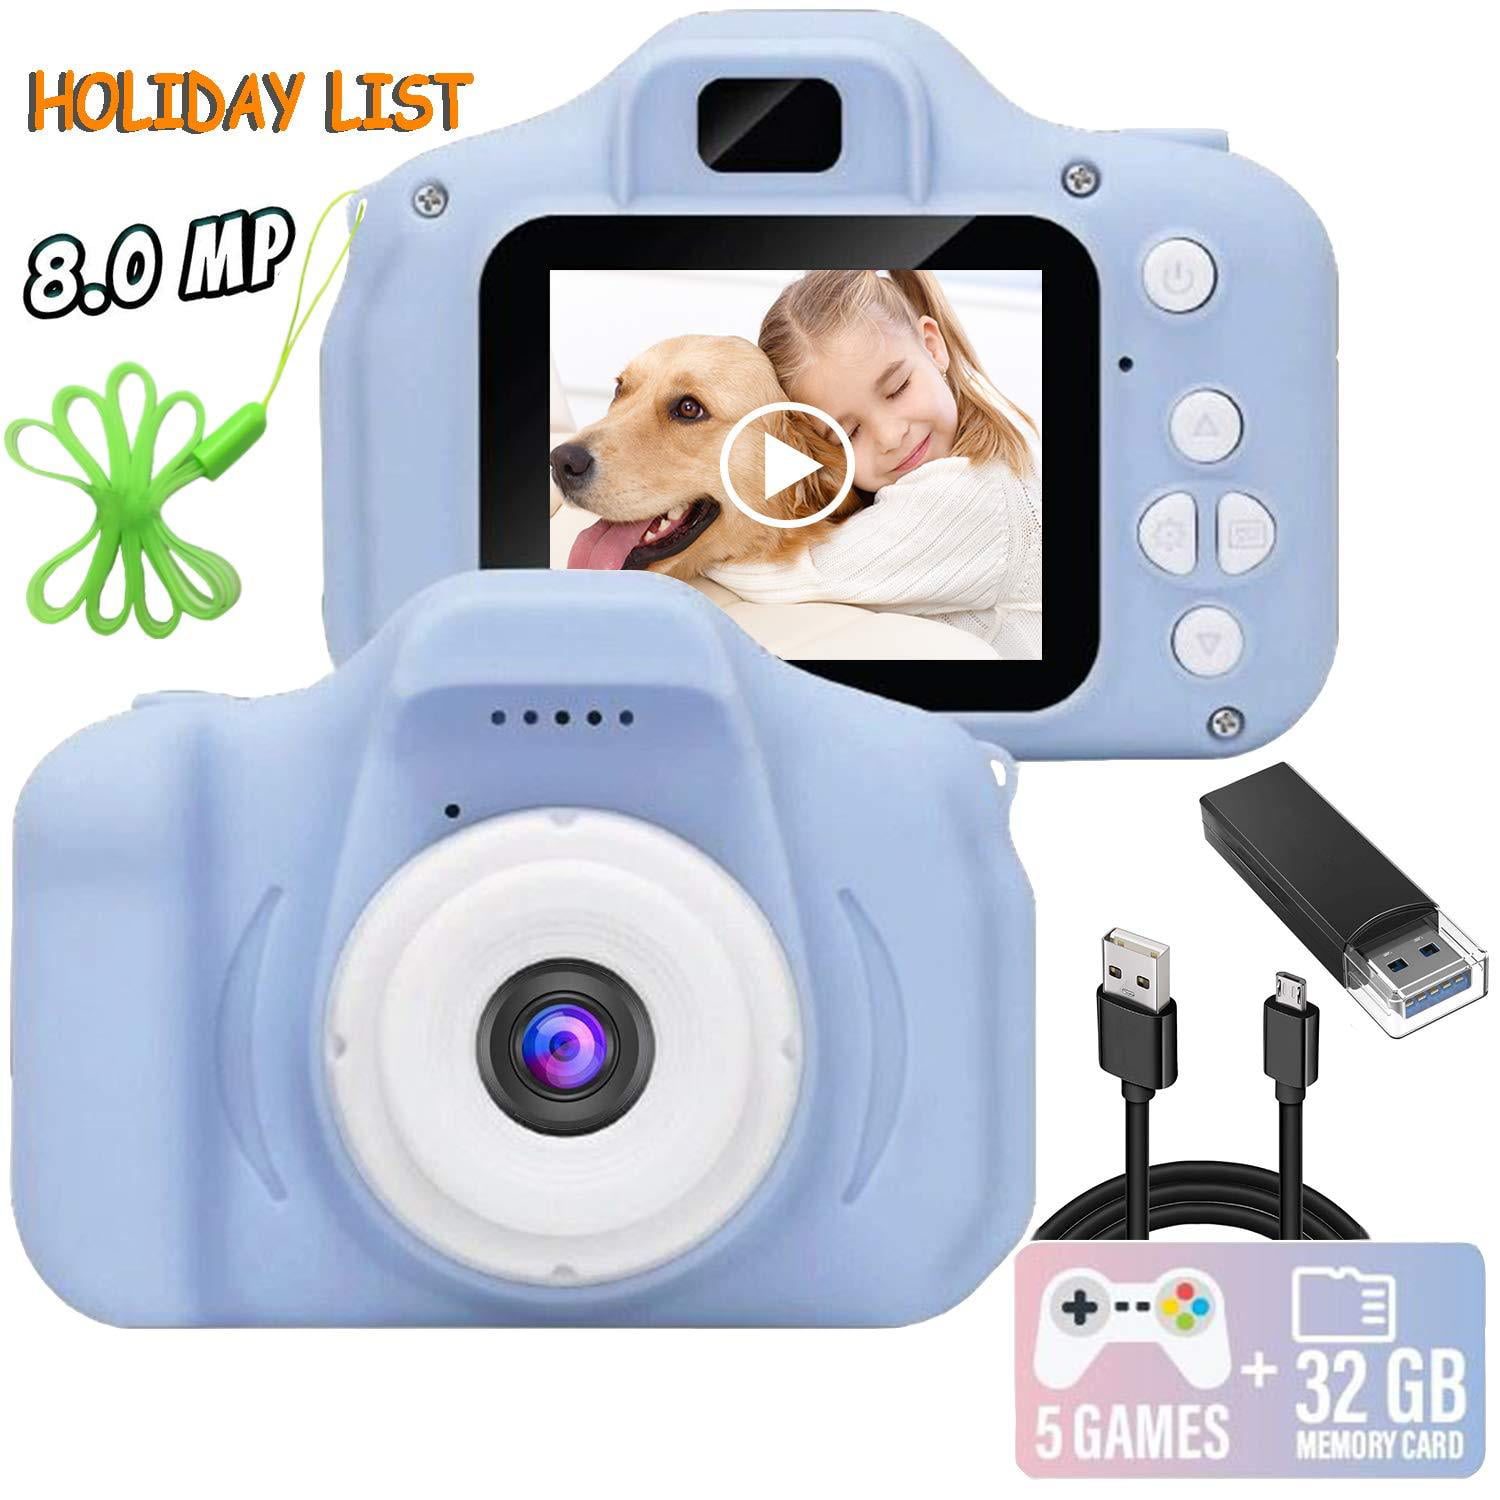 Kids Camera 8.0 MP FHD Digital Video Recorder Shockproof Action Cameras with 2 Inch IPS Screen and 32GB SD Card for Girls Boys Gifts Green 